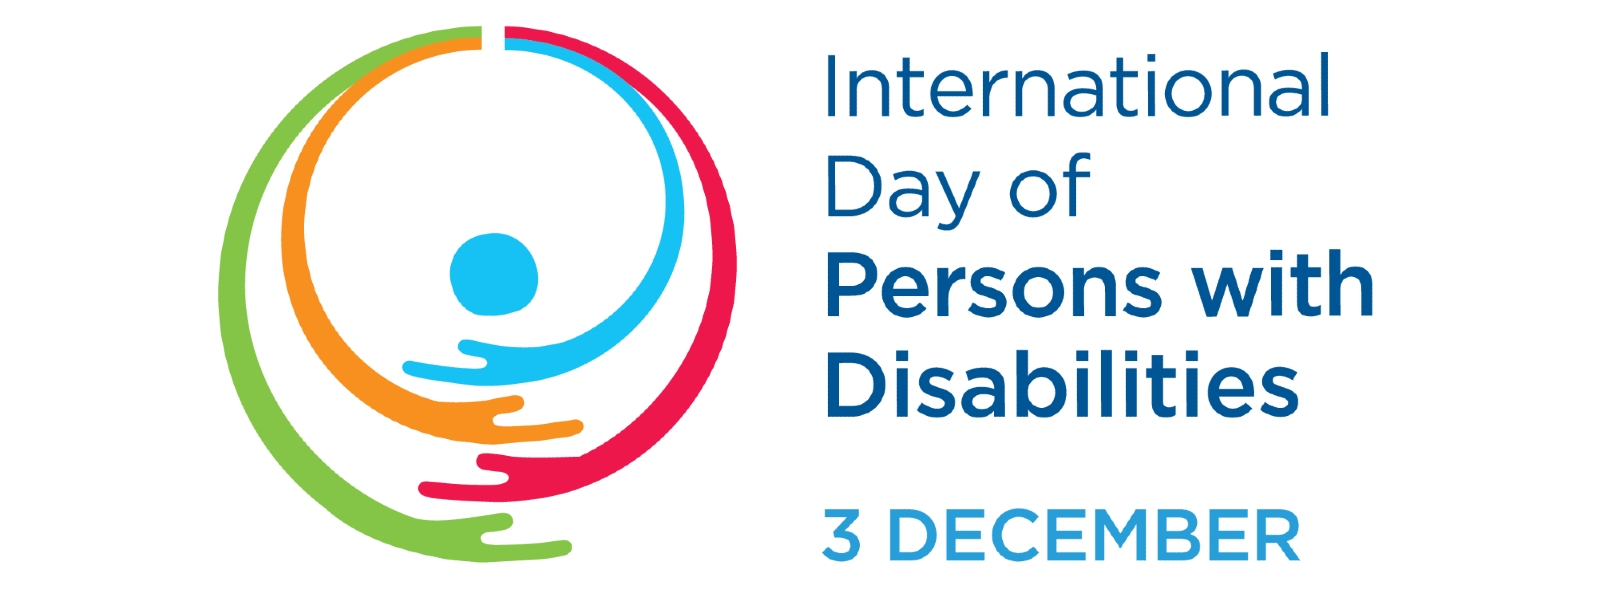 Today marks International Day of Persons with Disabilities (IDPD)